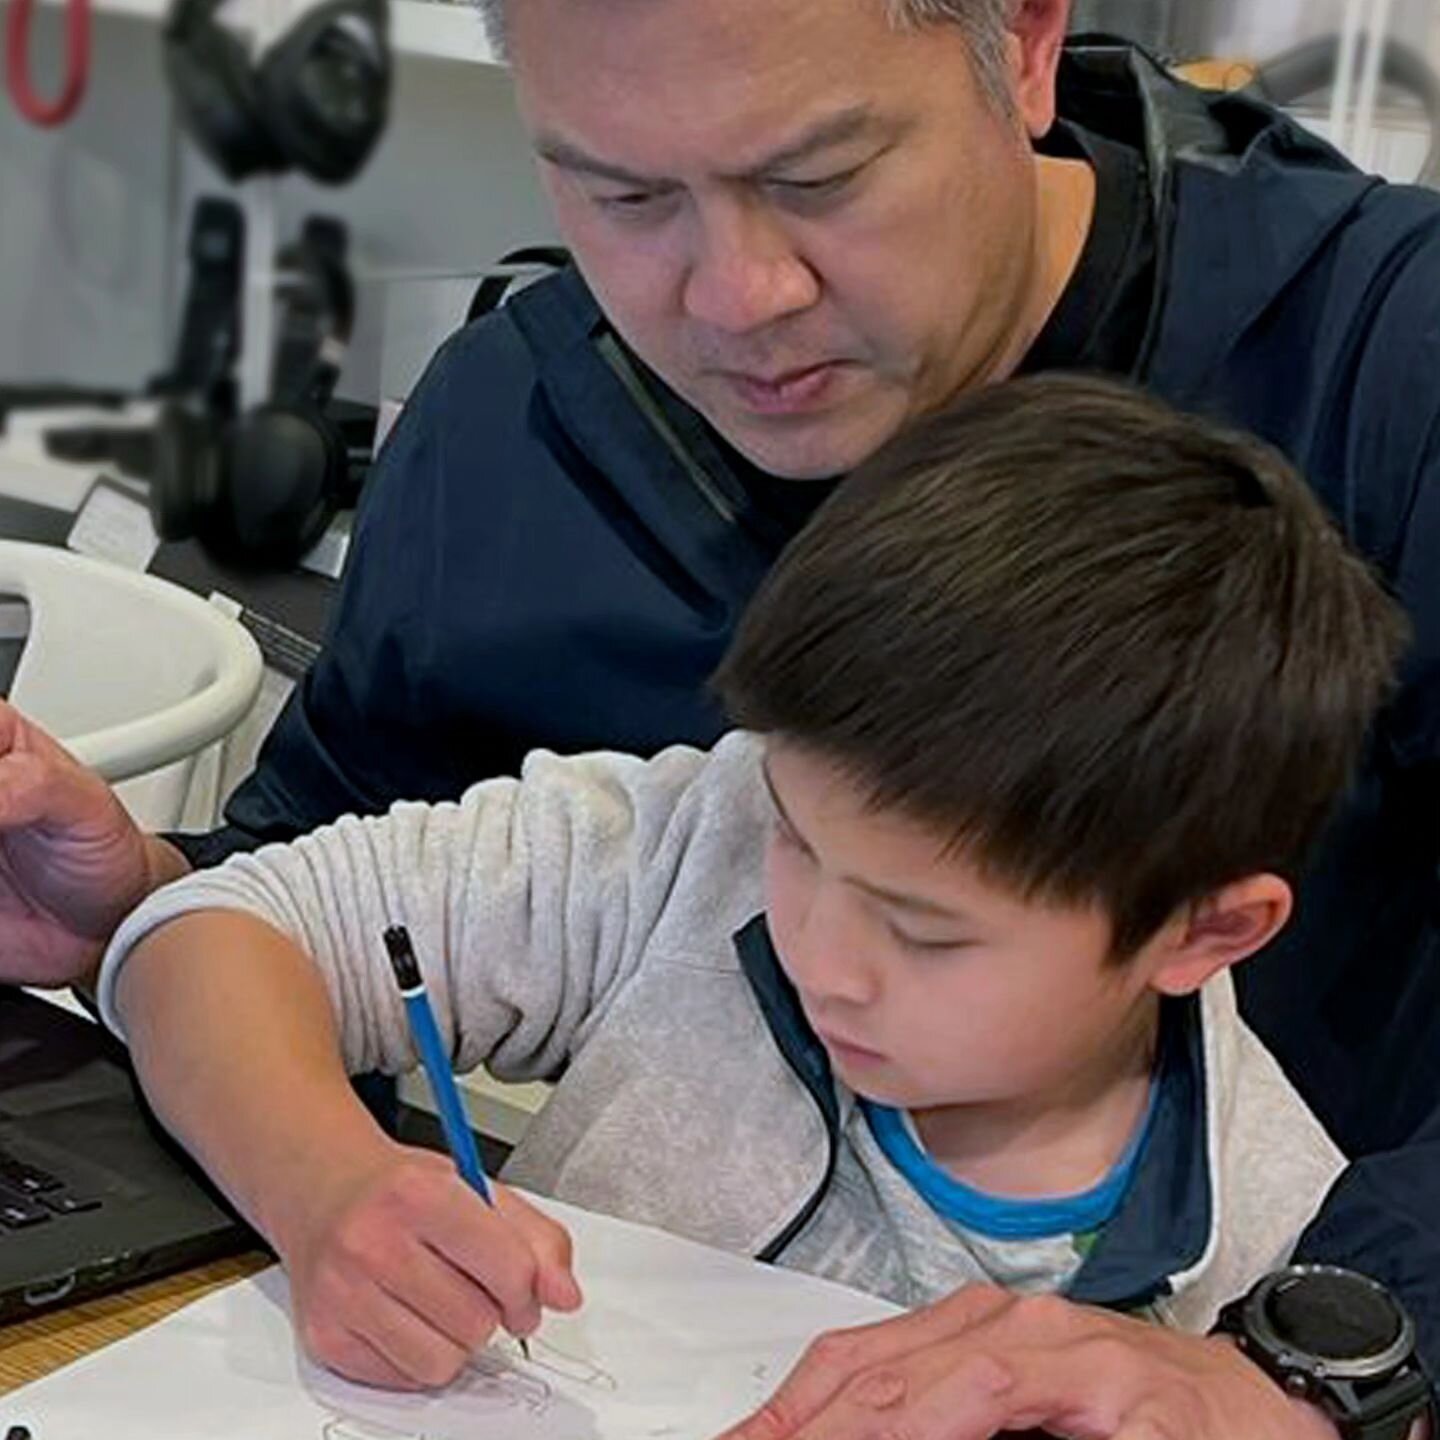 On top of our design projects and experience&nbsp;in navigating the manufacturing process,&nbsp;KOODESIGN is also about sharing our&nbsp;knowledge &ndash; including with the younger&nbsp;generation. KOODESIGN founder Larry&nbsp;Koo&rsquo;s son and a 